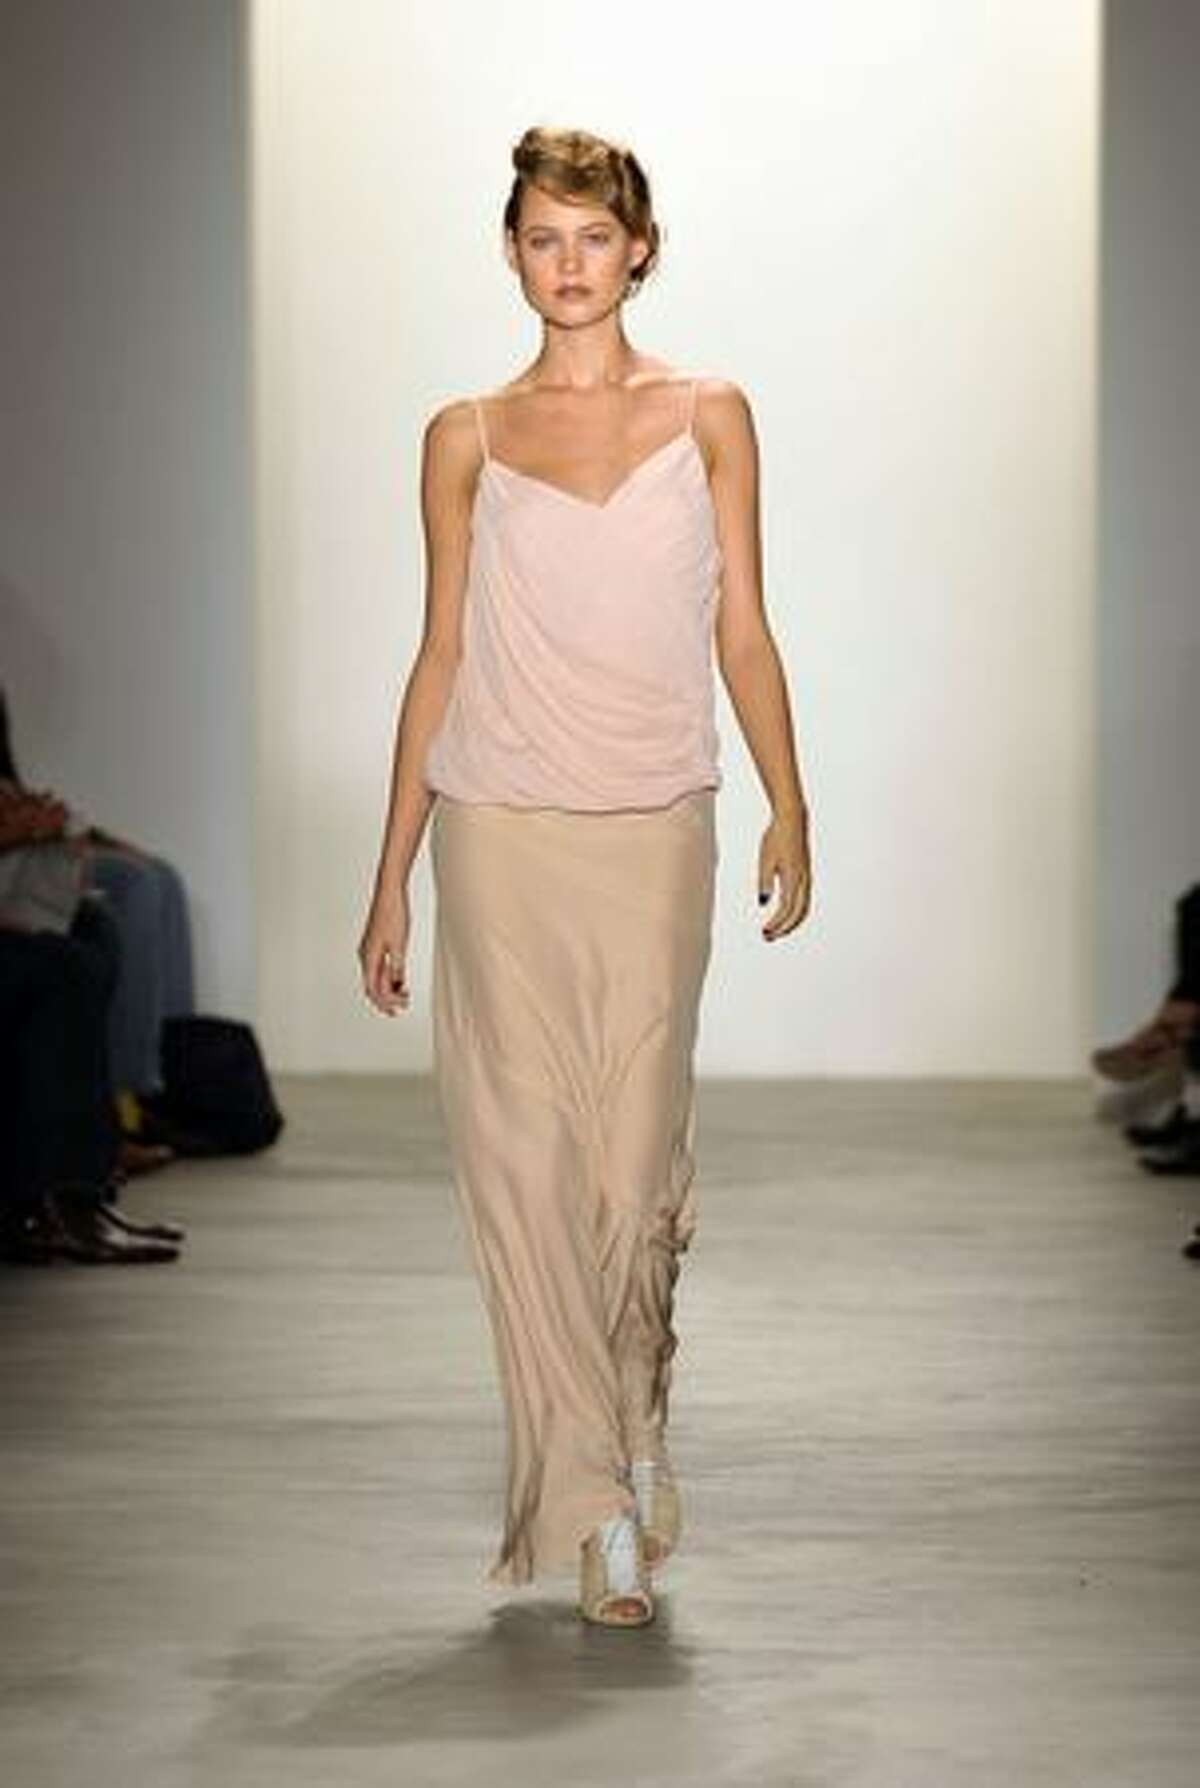 A model walks the runway at the Behnaz Sarafpour Spring 2010 Fashion Show at Milk Studio on Sunday in New York City.